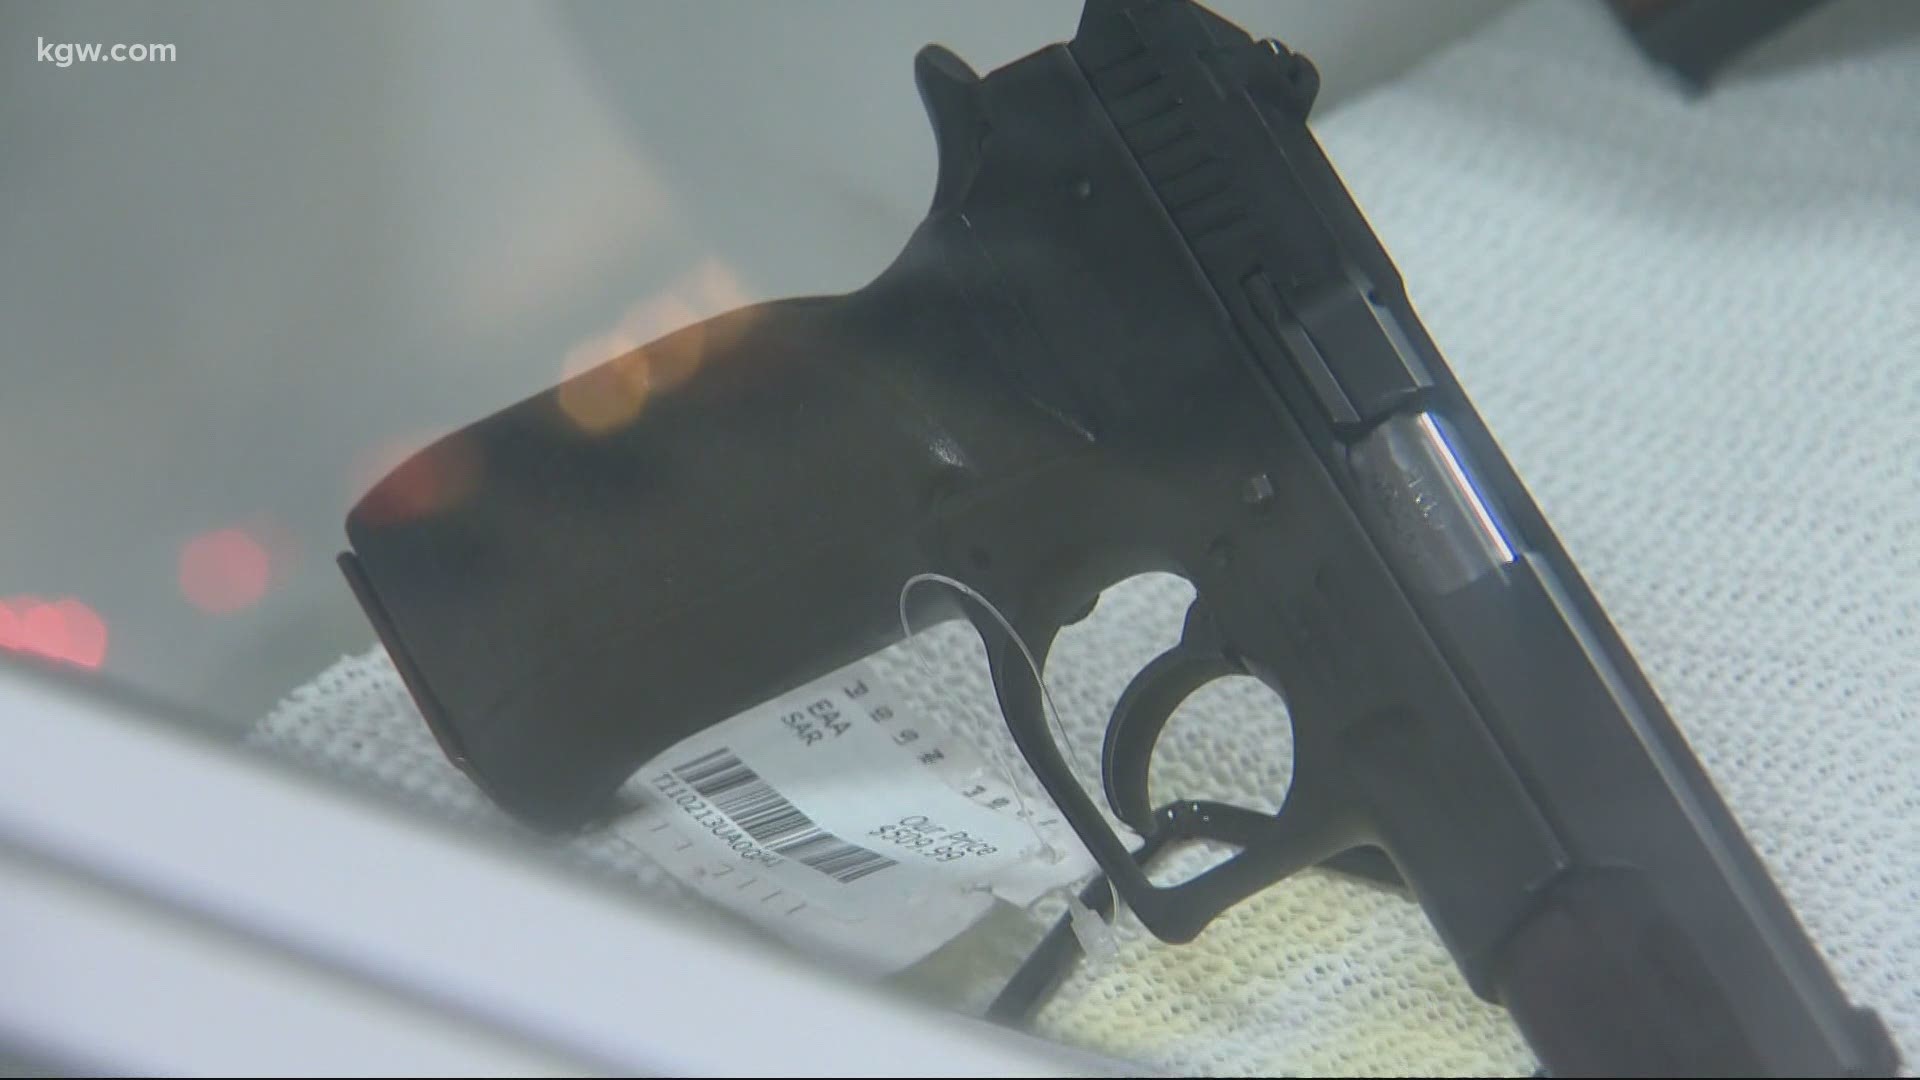 There’s a record number of gun sales in the U.S. with two months left in 2020. Joe Raineri has more on what’s leading to the surge in sales.